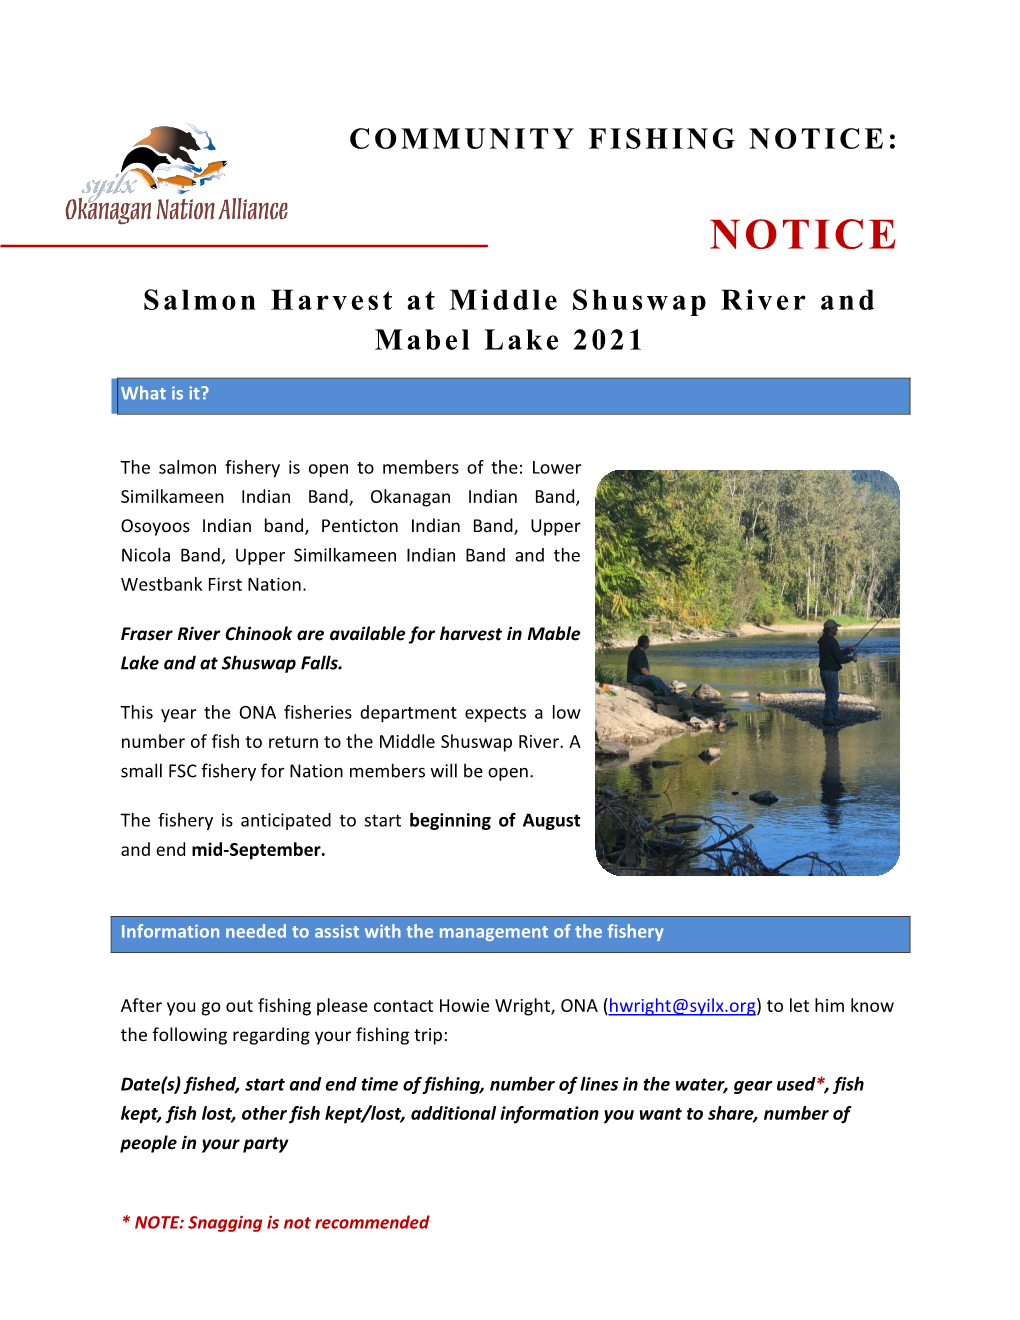 2021 Chinook Fishery at Middle Shuswap River and Mabel Lake